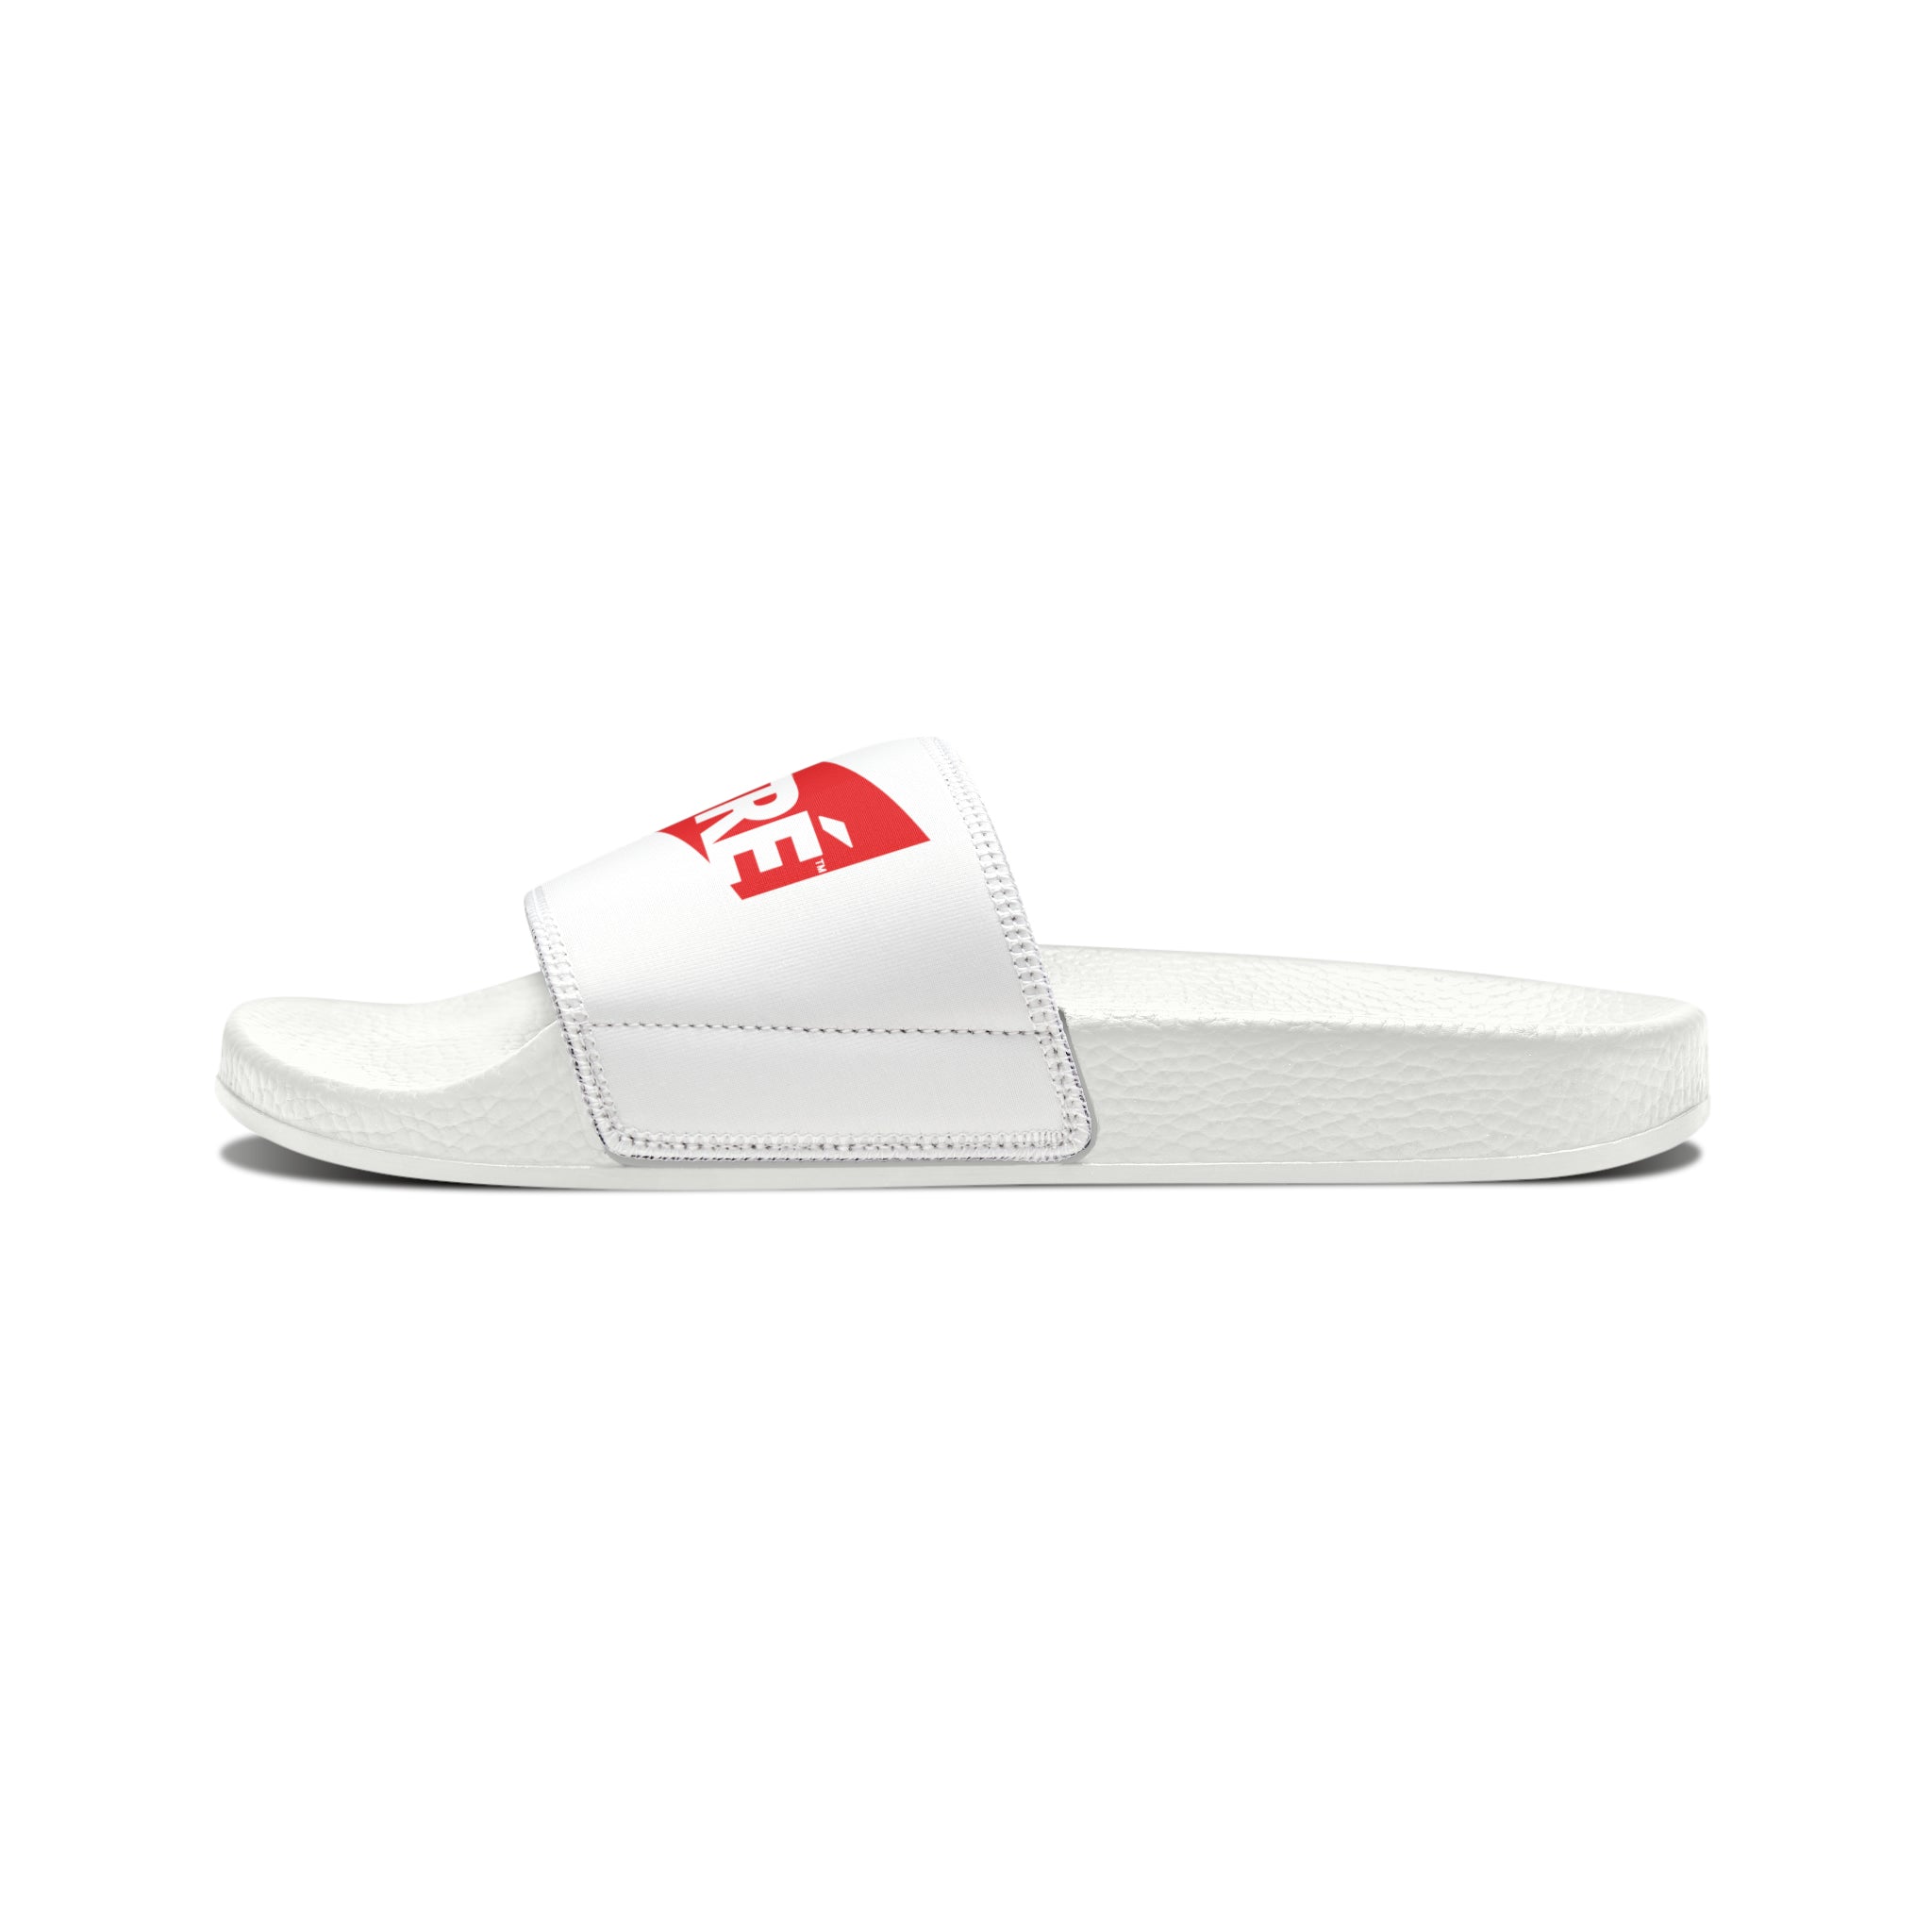 Holy grail Youth Slide Sandals